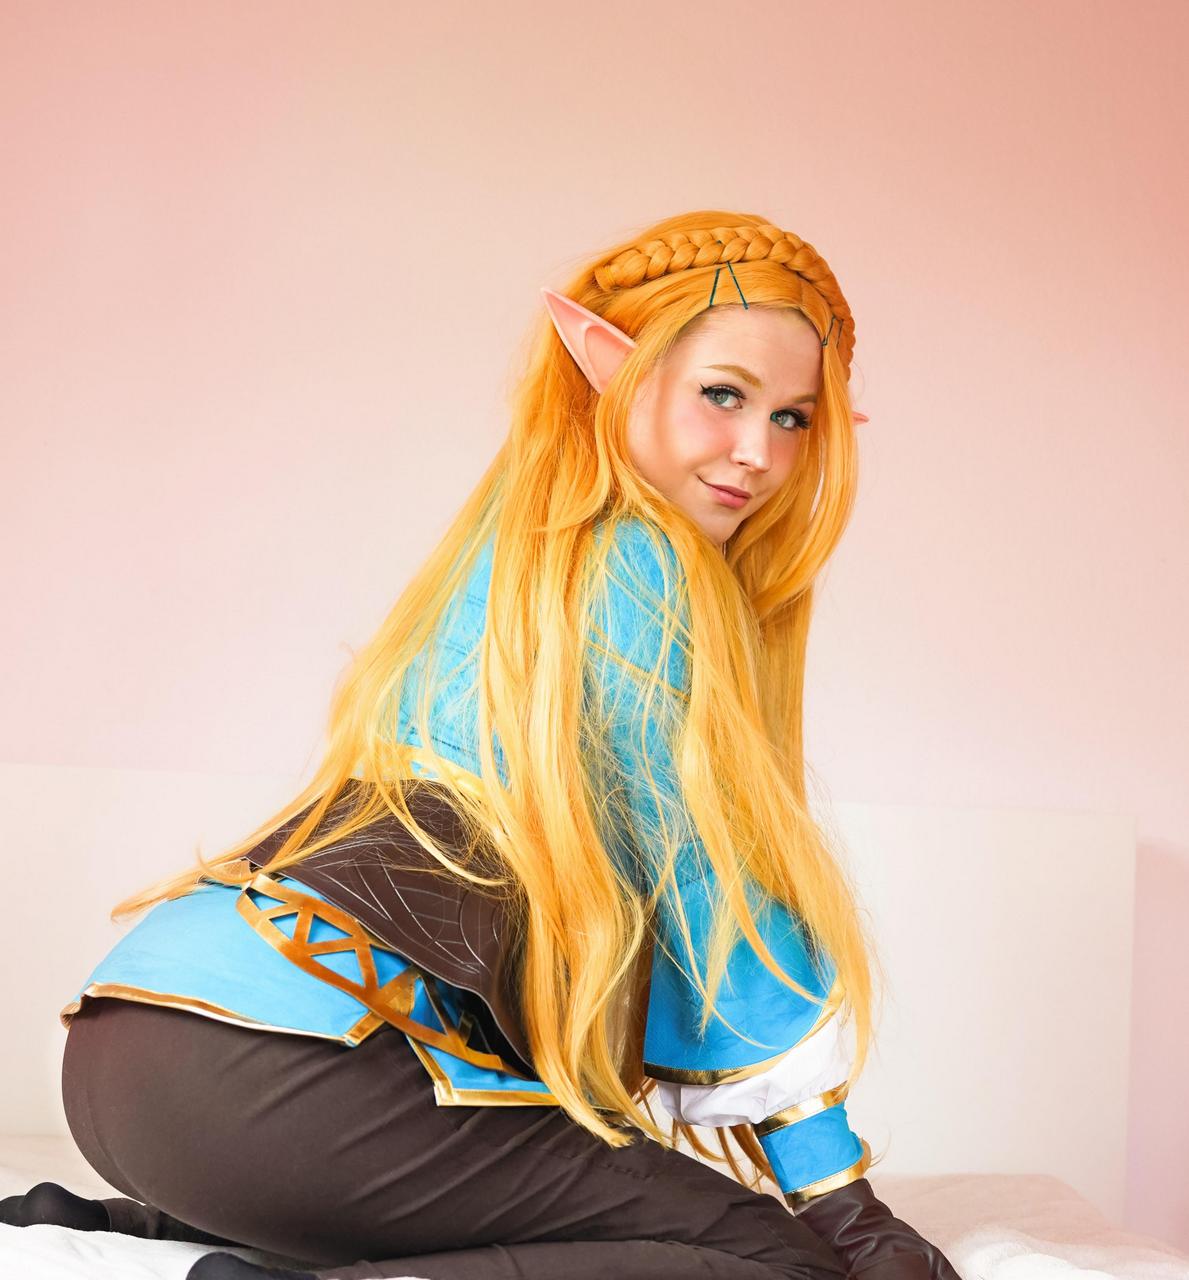 Zelda From Breath Of The Wild By Sheepia